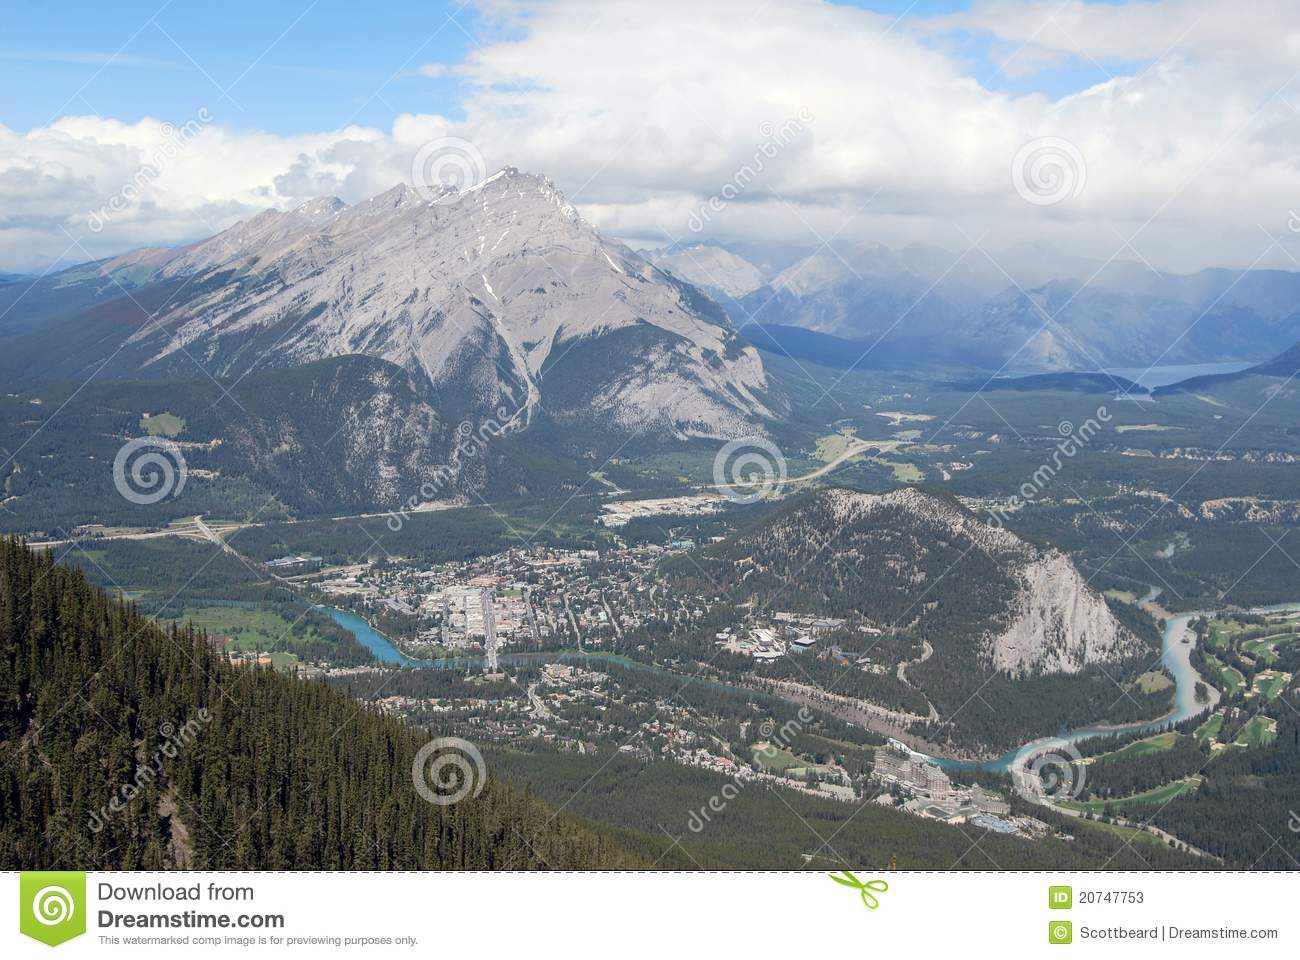 Sulphur Mountain clipart #5, Download drawings